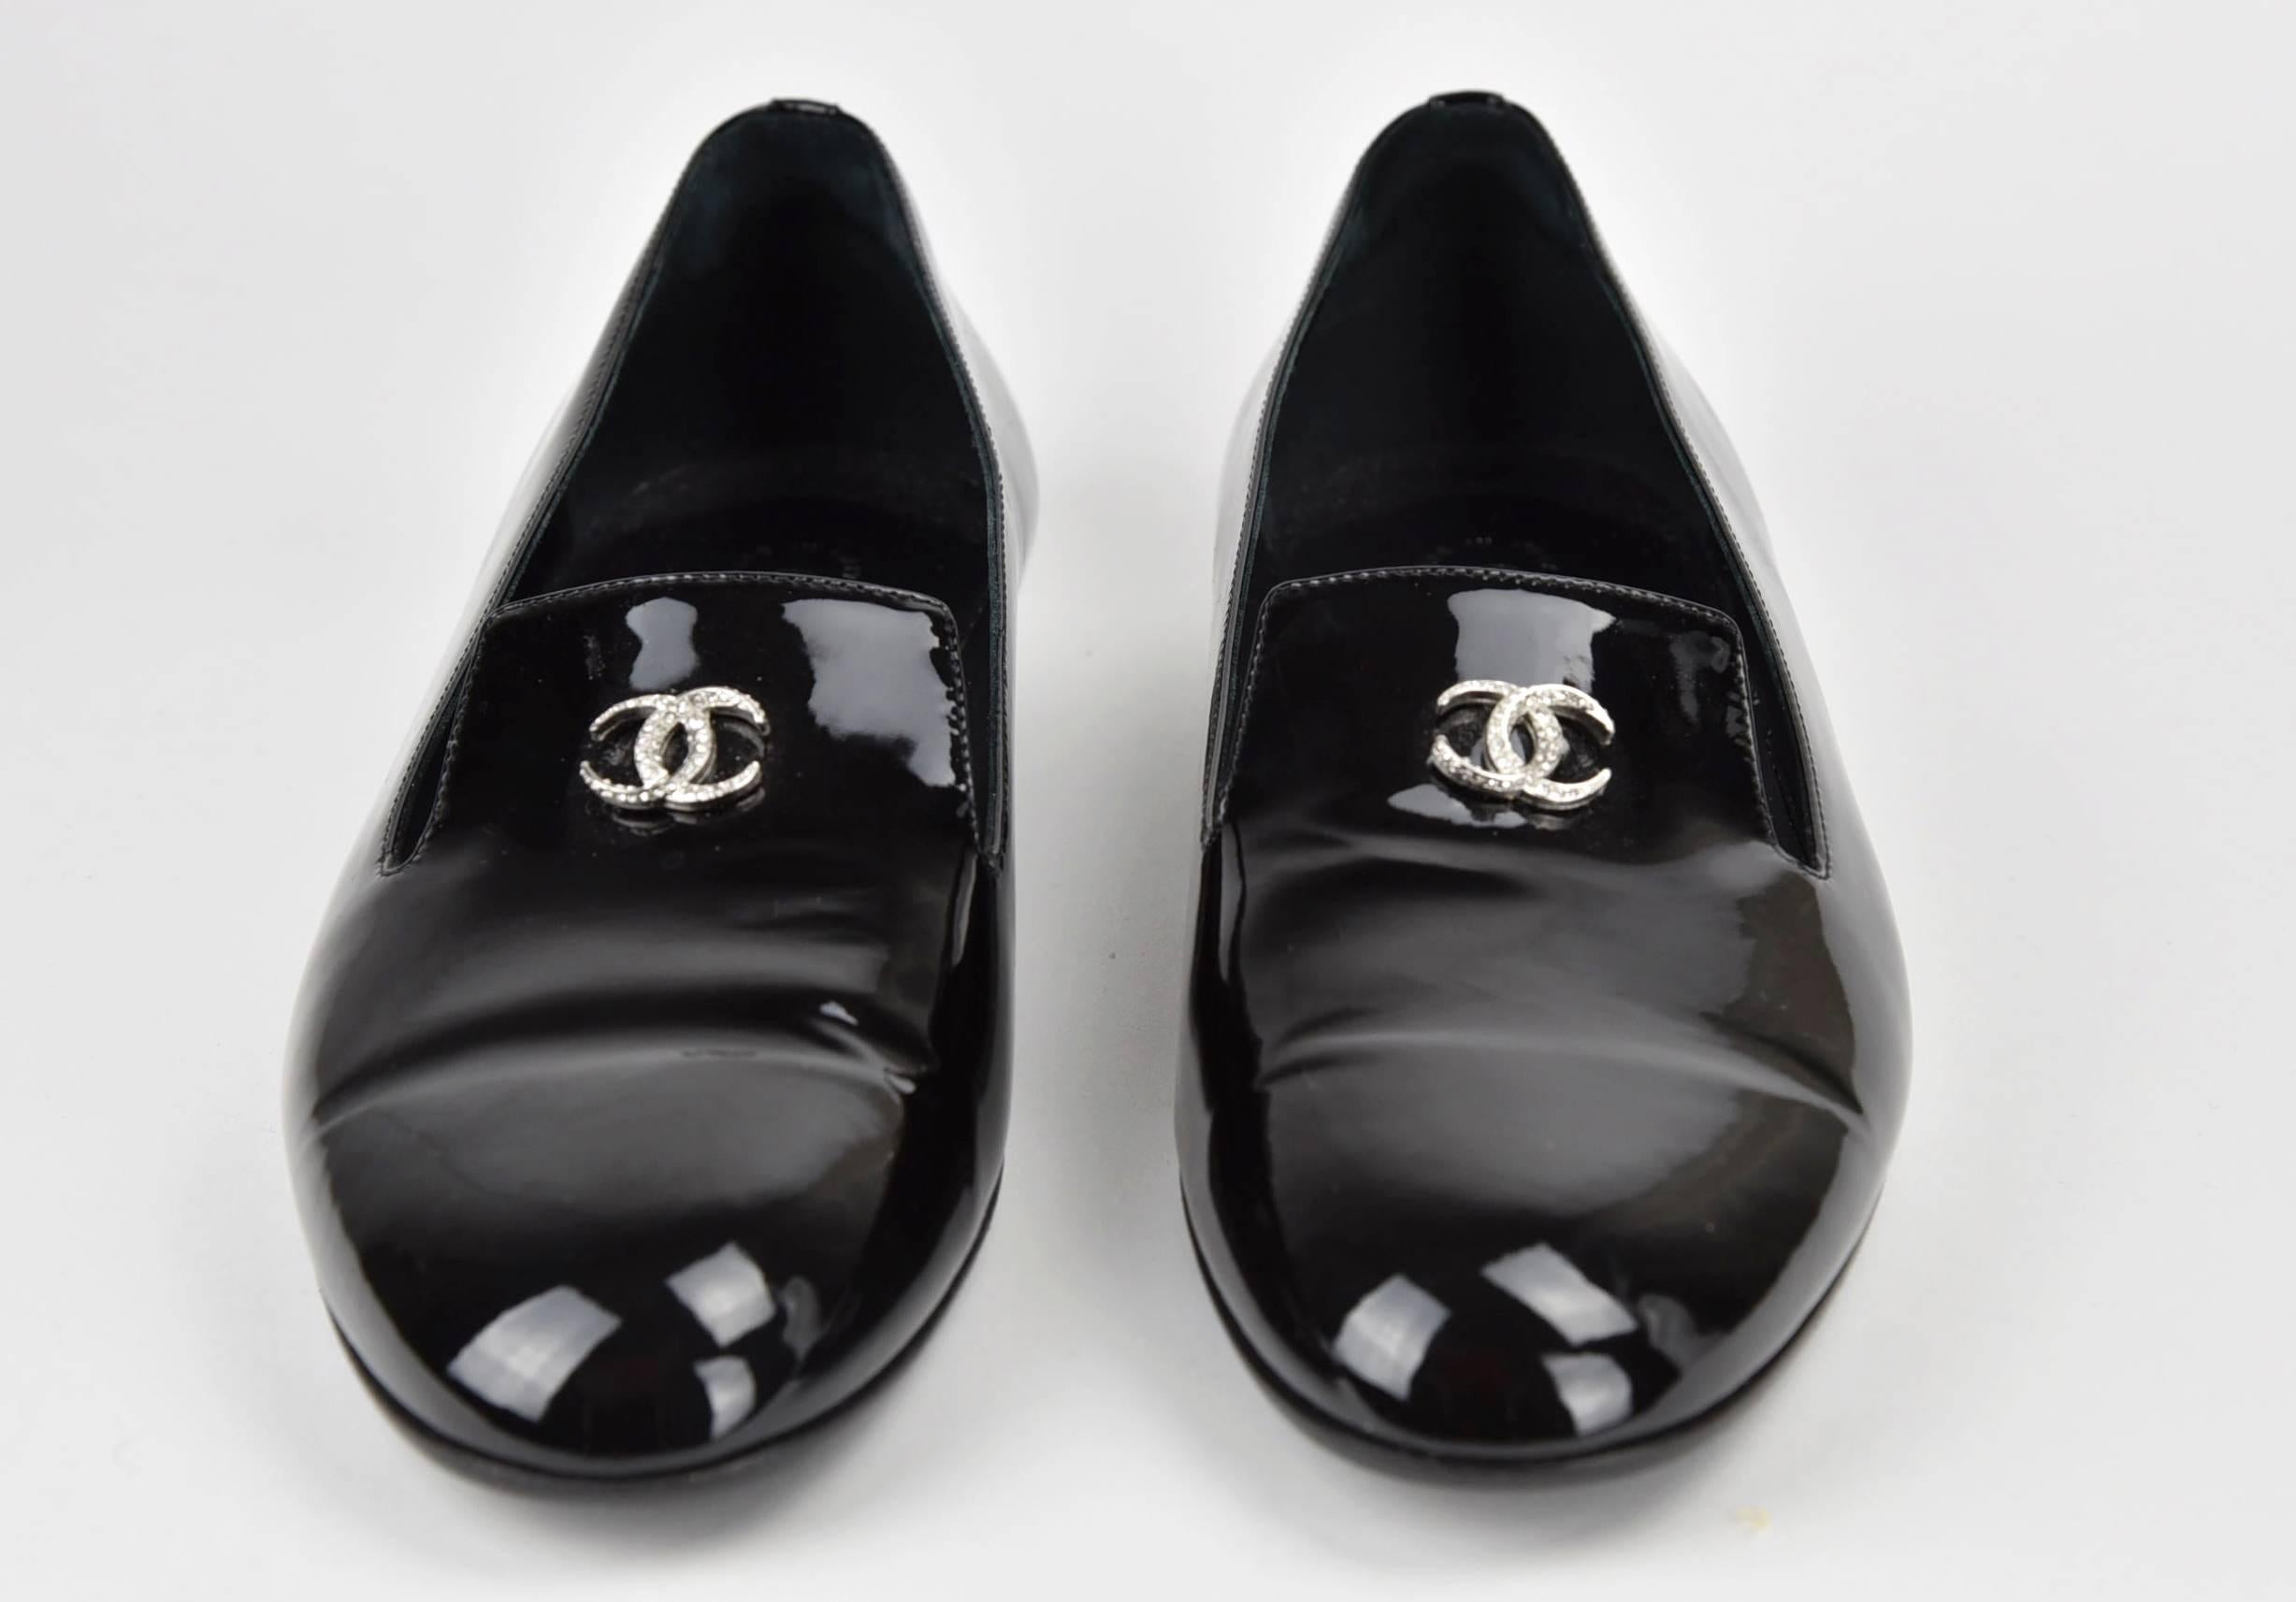 Women's 2015 Chanel Black Patent Leather Loafers with Rhinestone CC FR 40 1/2